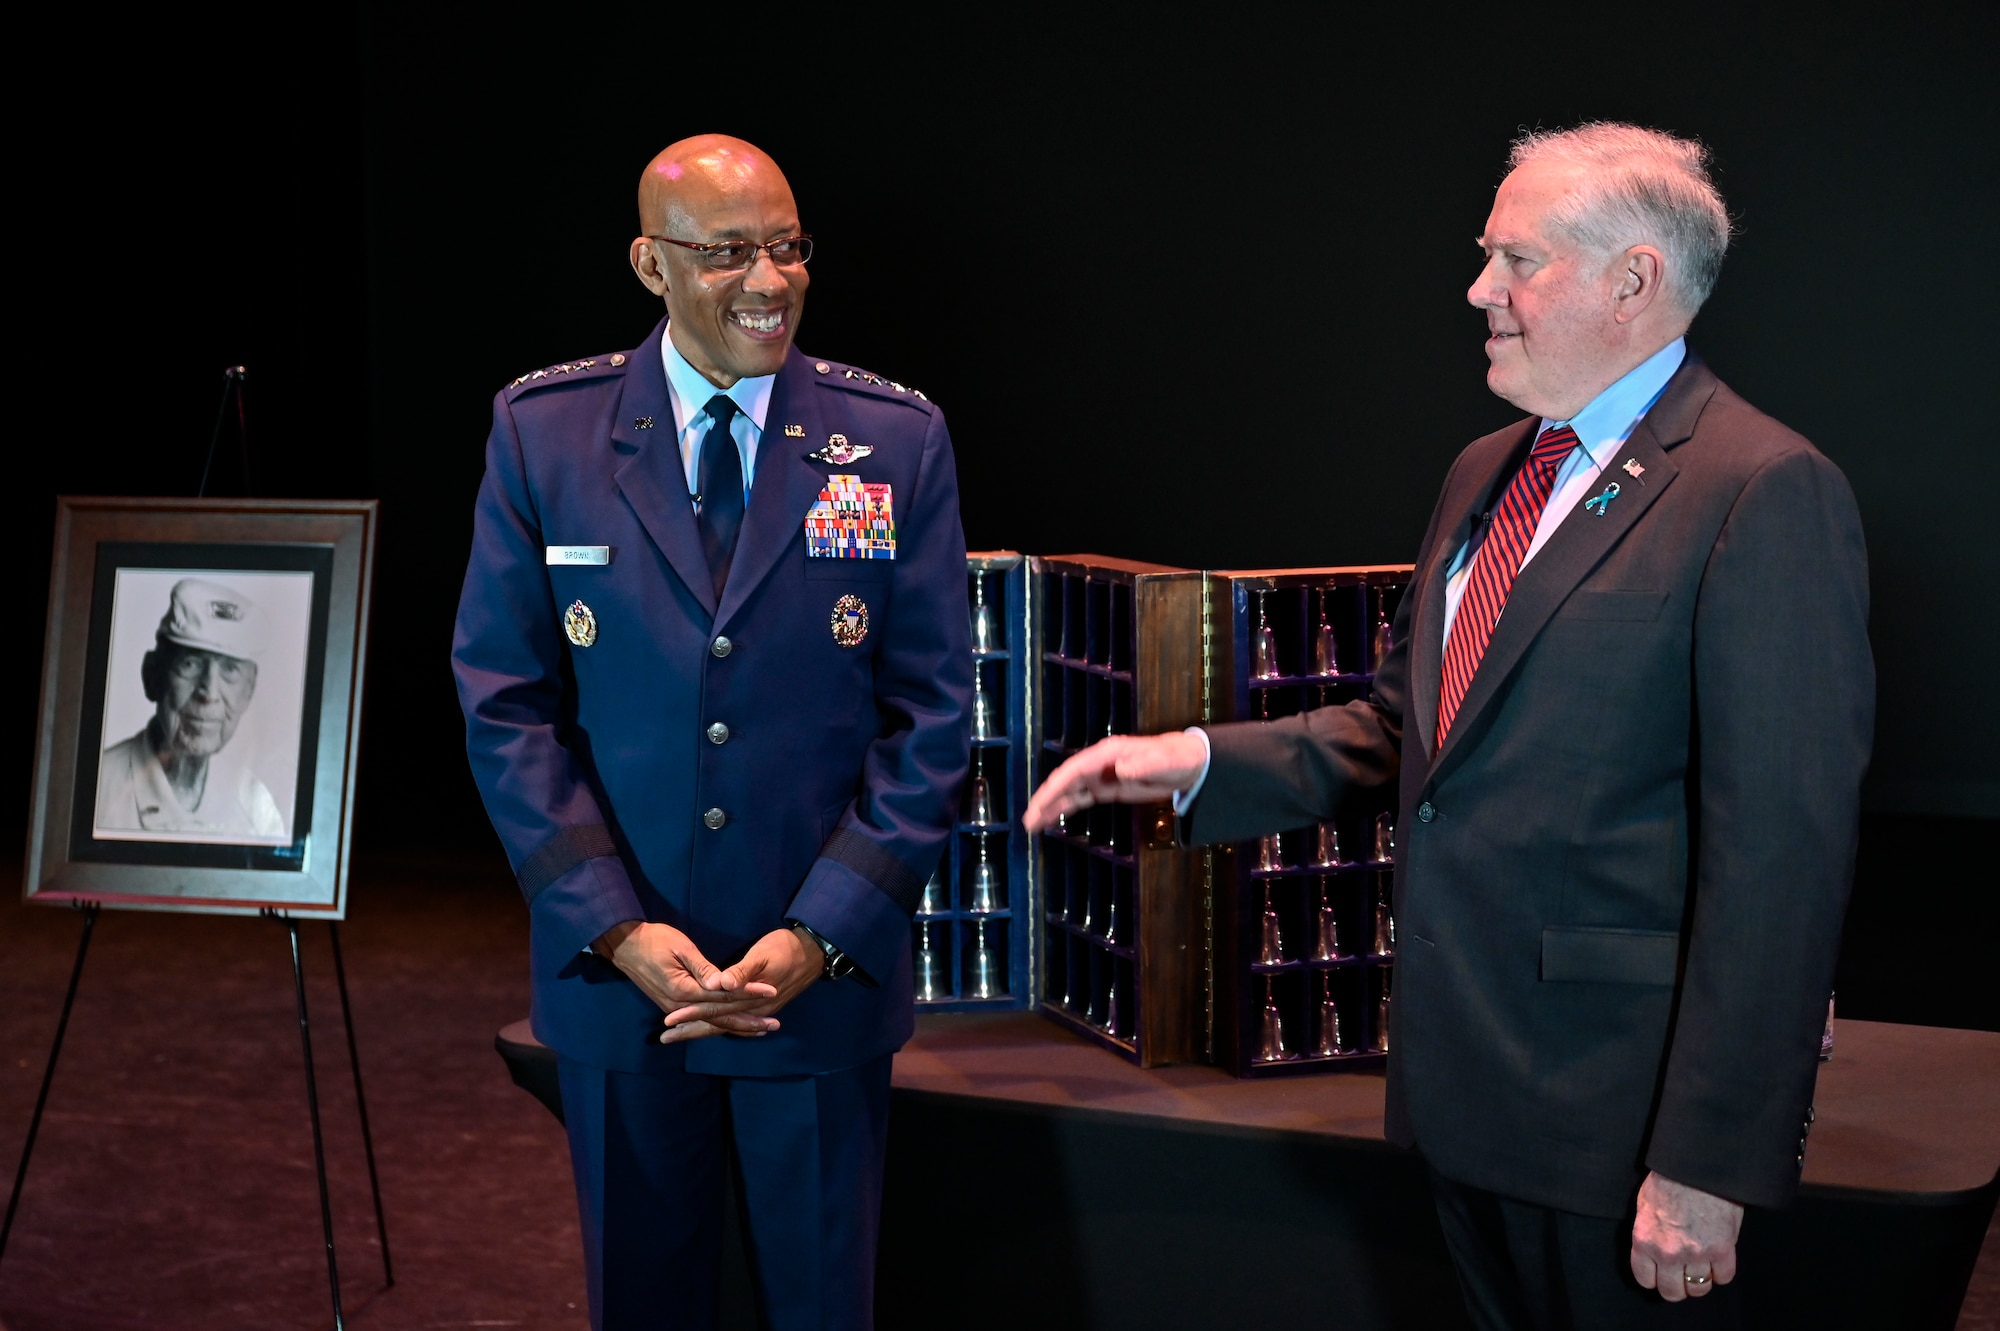 Secretary of the Air Force Frank Kendall, right, and Air Force Chief of Staff Gen. CQ Brown, Jr. give an interview before a ceremony commemorating the Doolittle Raiders in Fort Walton Beach, Fla., April 18. 2022.